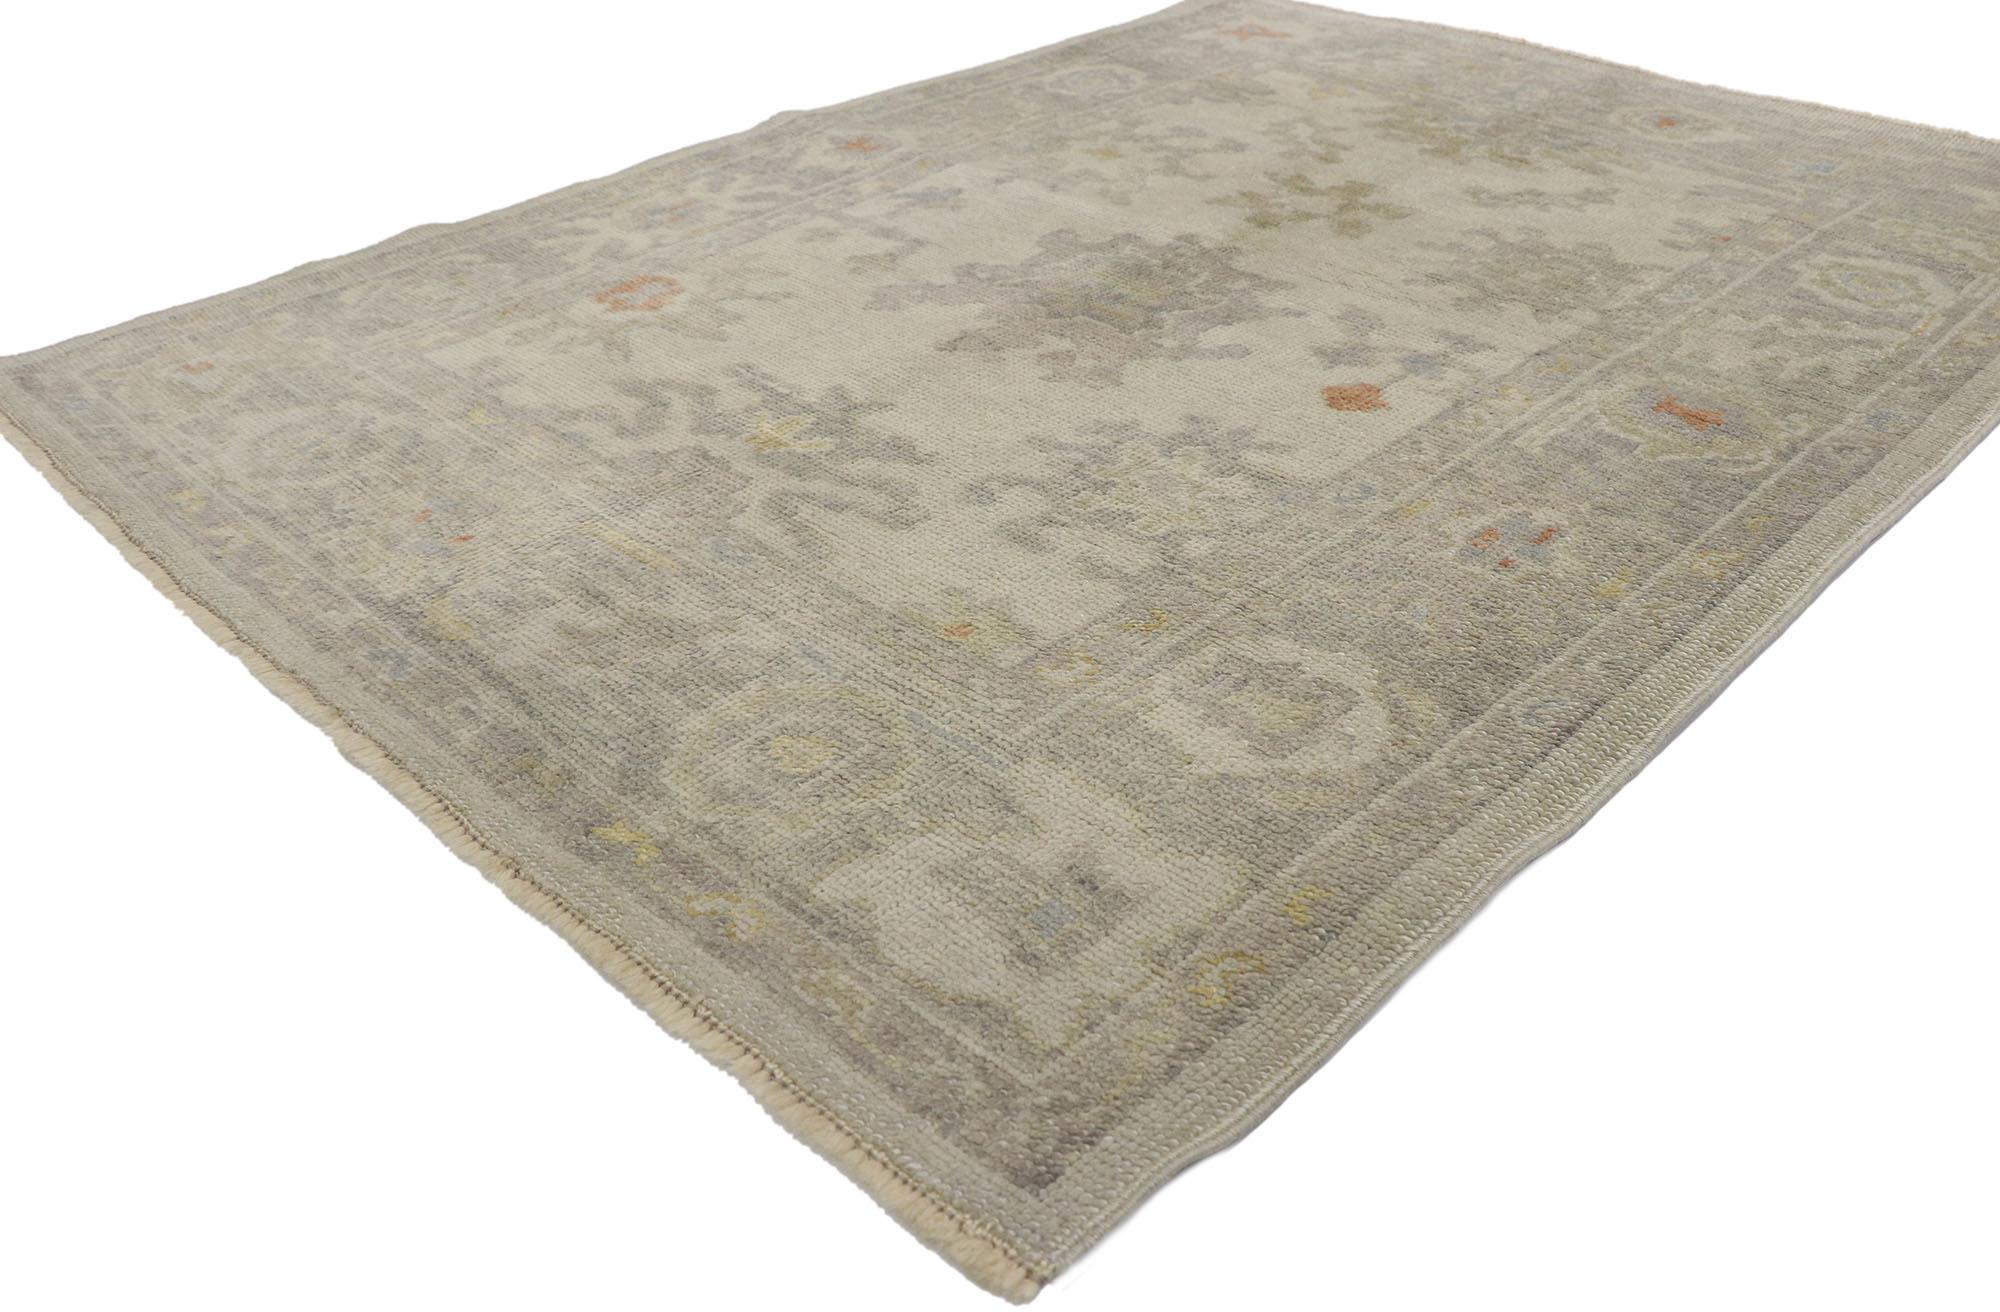 53609 new contemporary Turkish oushak rug with Transitional style 04'02 x 05'07. Warm and inviting with neutral colors, this hand-knotted wool contemporary Turkish Oushak rug beautifully embodies a transitional style. The abrashed oyster gray field